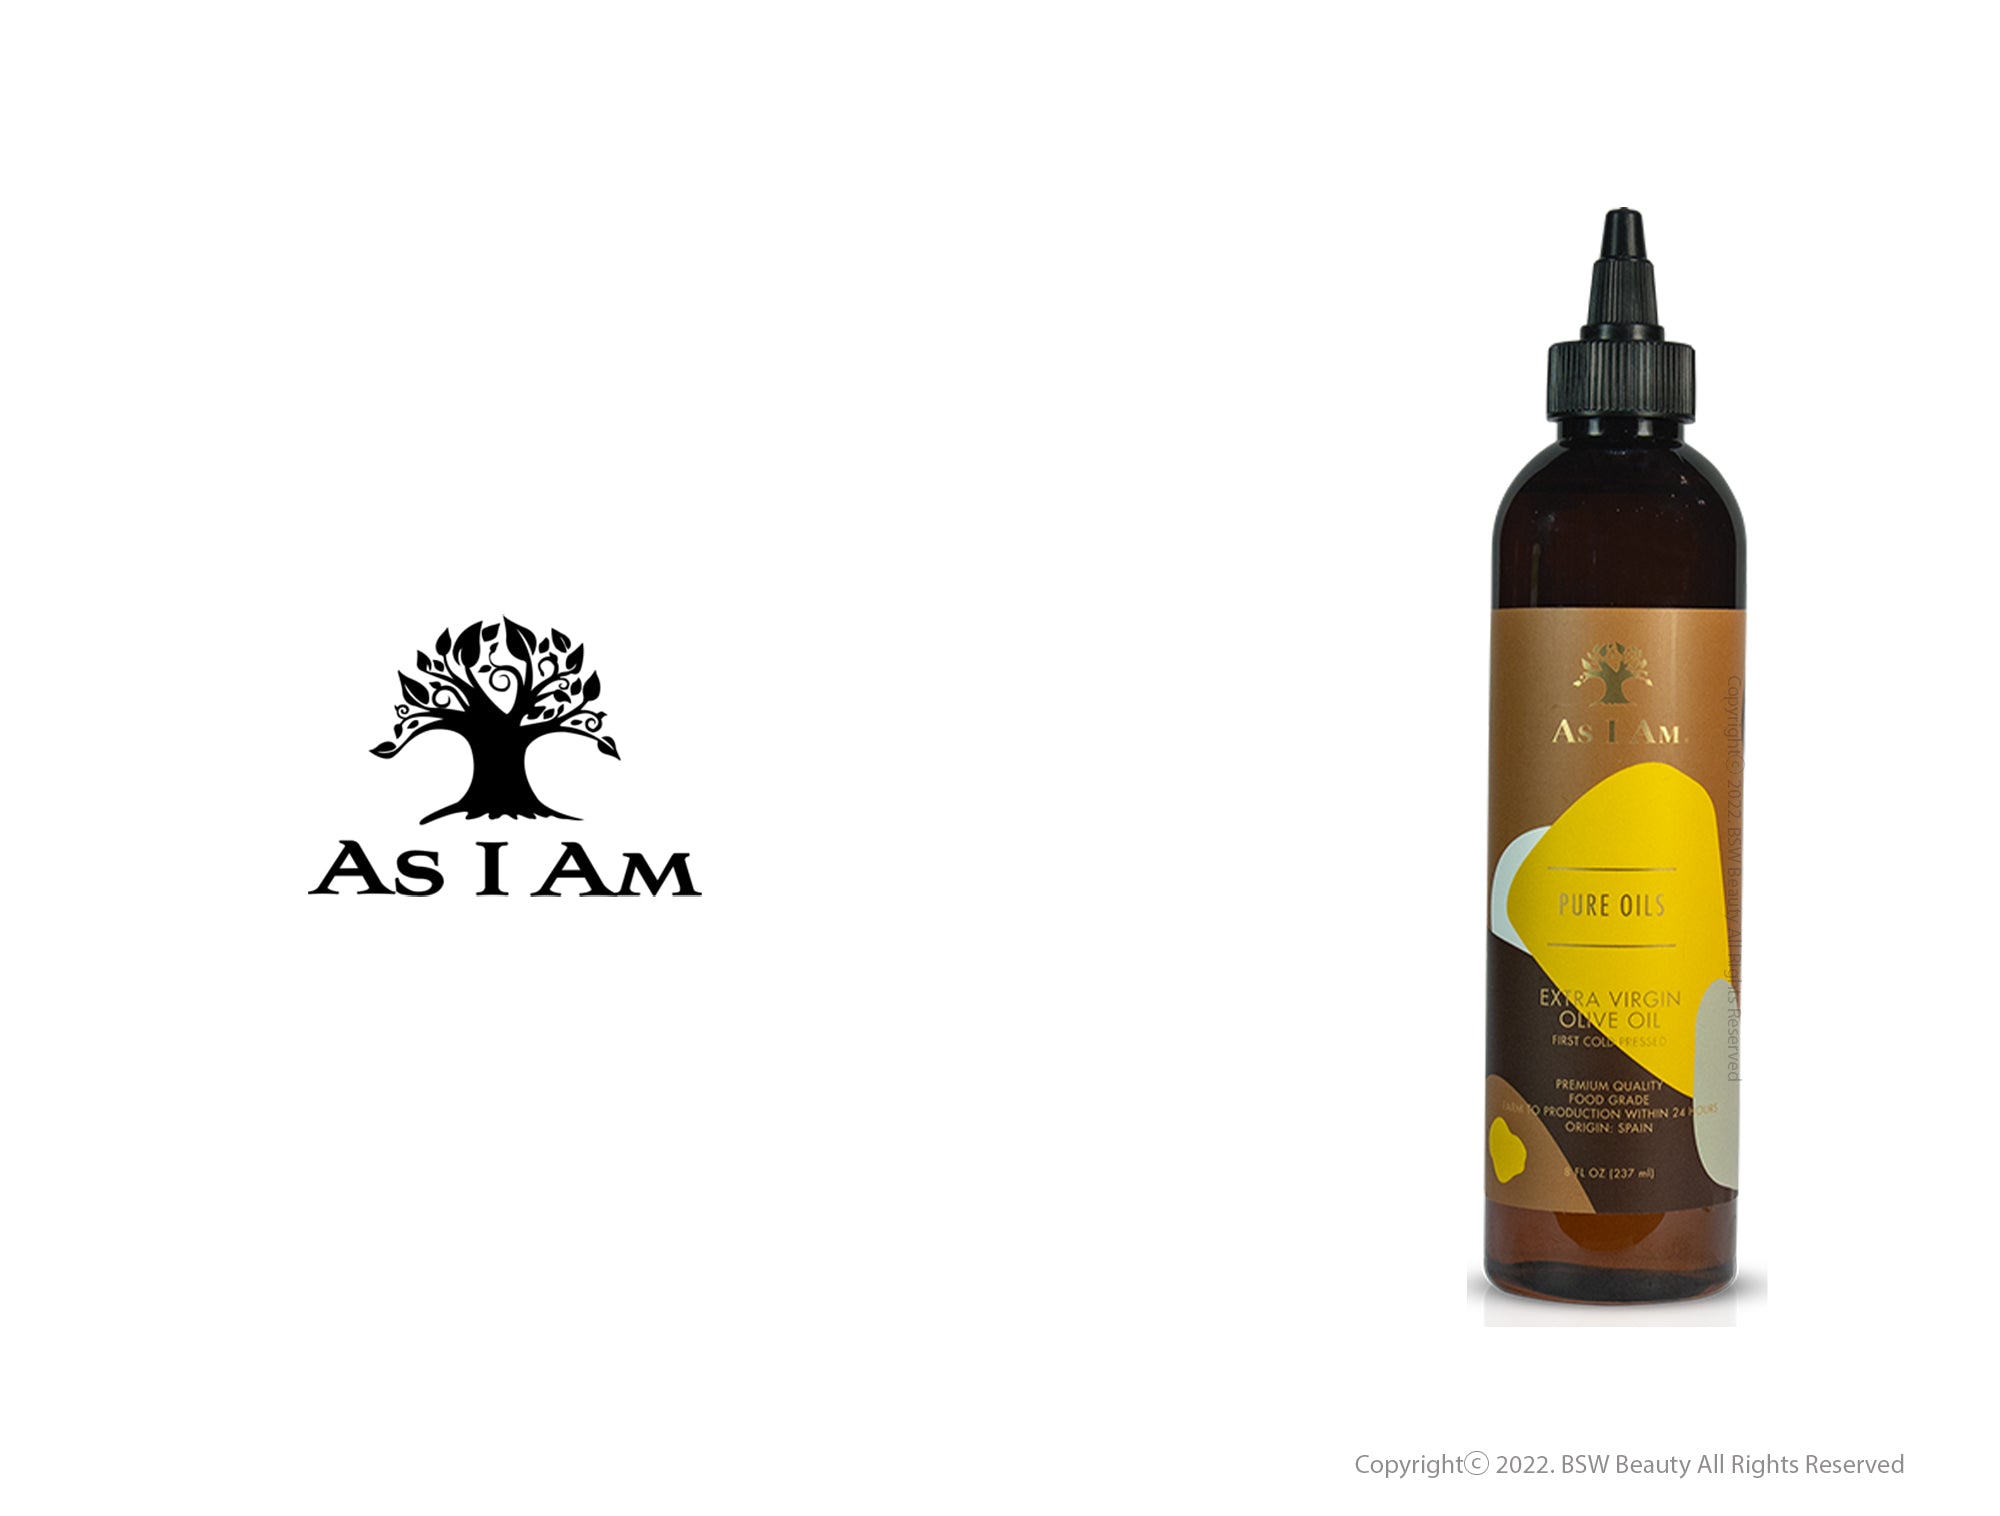 AS I AM PURE OILS EXTRA VIRGIN OLIVE OIL 8oz